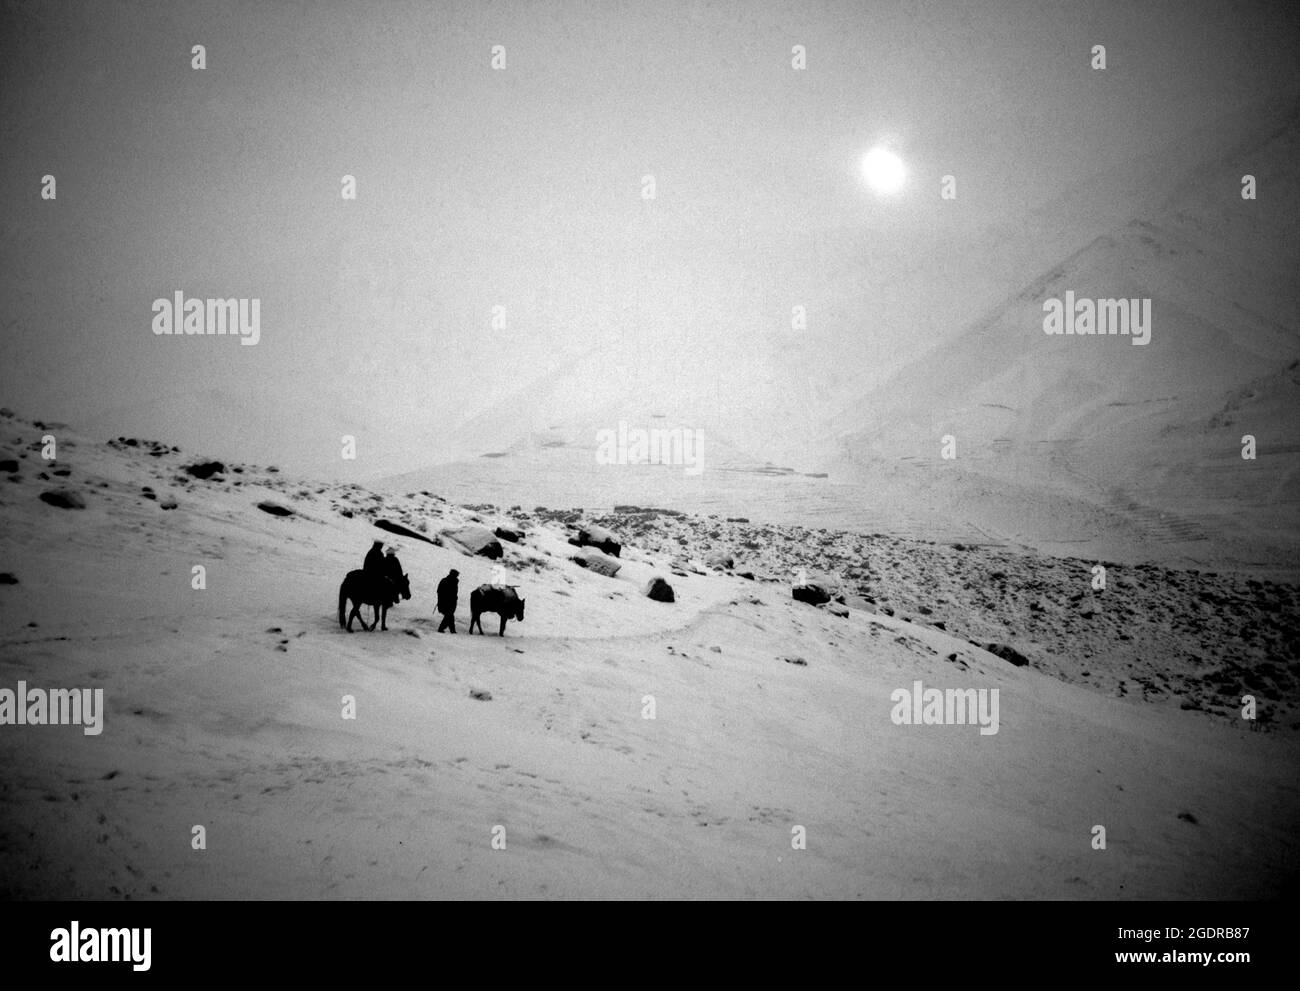 Circa 1980's, Afghanistan: The rugged, inhospitable terrain of Afghanistan. Insurgent groups in Afghanistan (known collectively as the mujahideen) fought a nine-year guerrilla war against the Soviet Army and the Democratic Republic of Afghanistan government throughout the 1980s, mostly in the Afghan countryside. In what was a Cold War-era proxy war, the Mujahideen were backed by the United States, Pakistan, Iran, Saudi Arabia, China, and the United Kingdom. (Credit Image: © Mark Richards/ZUMA Press Wire Service) Stock Photo